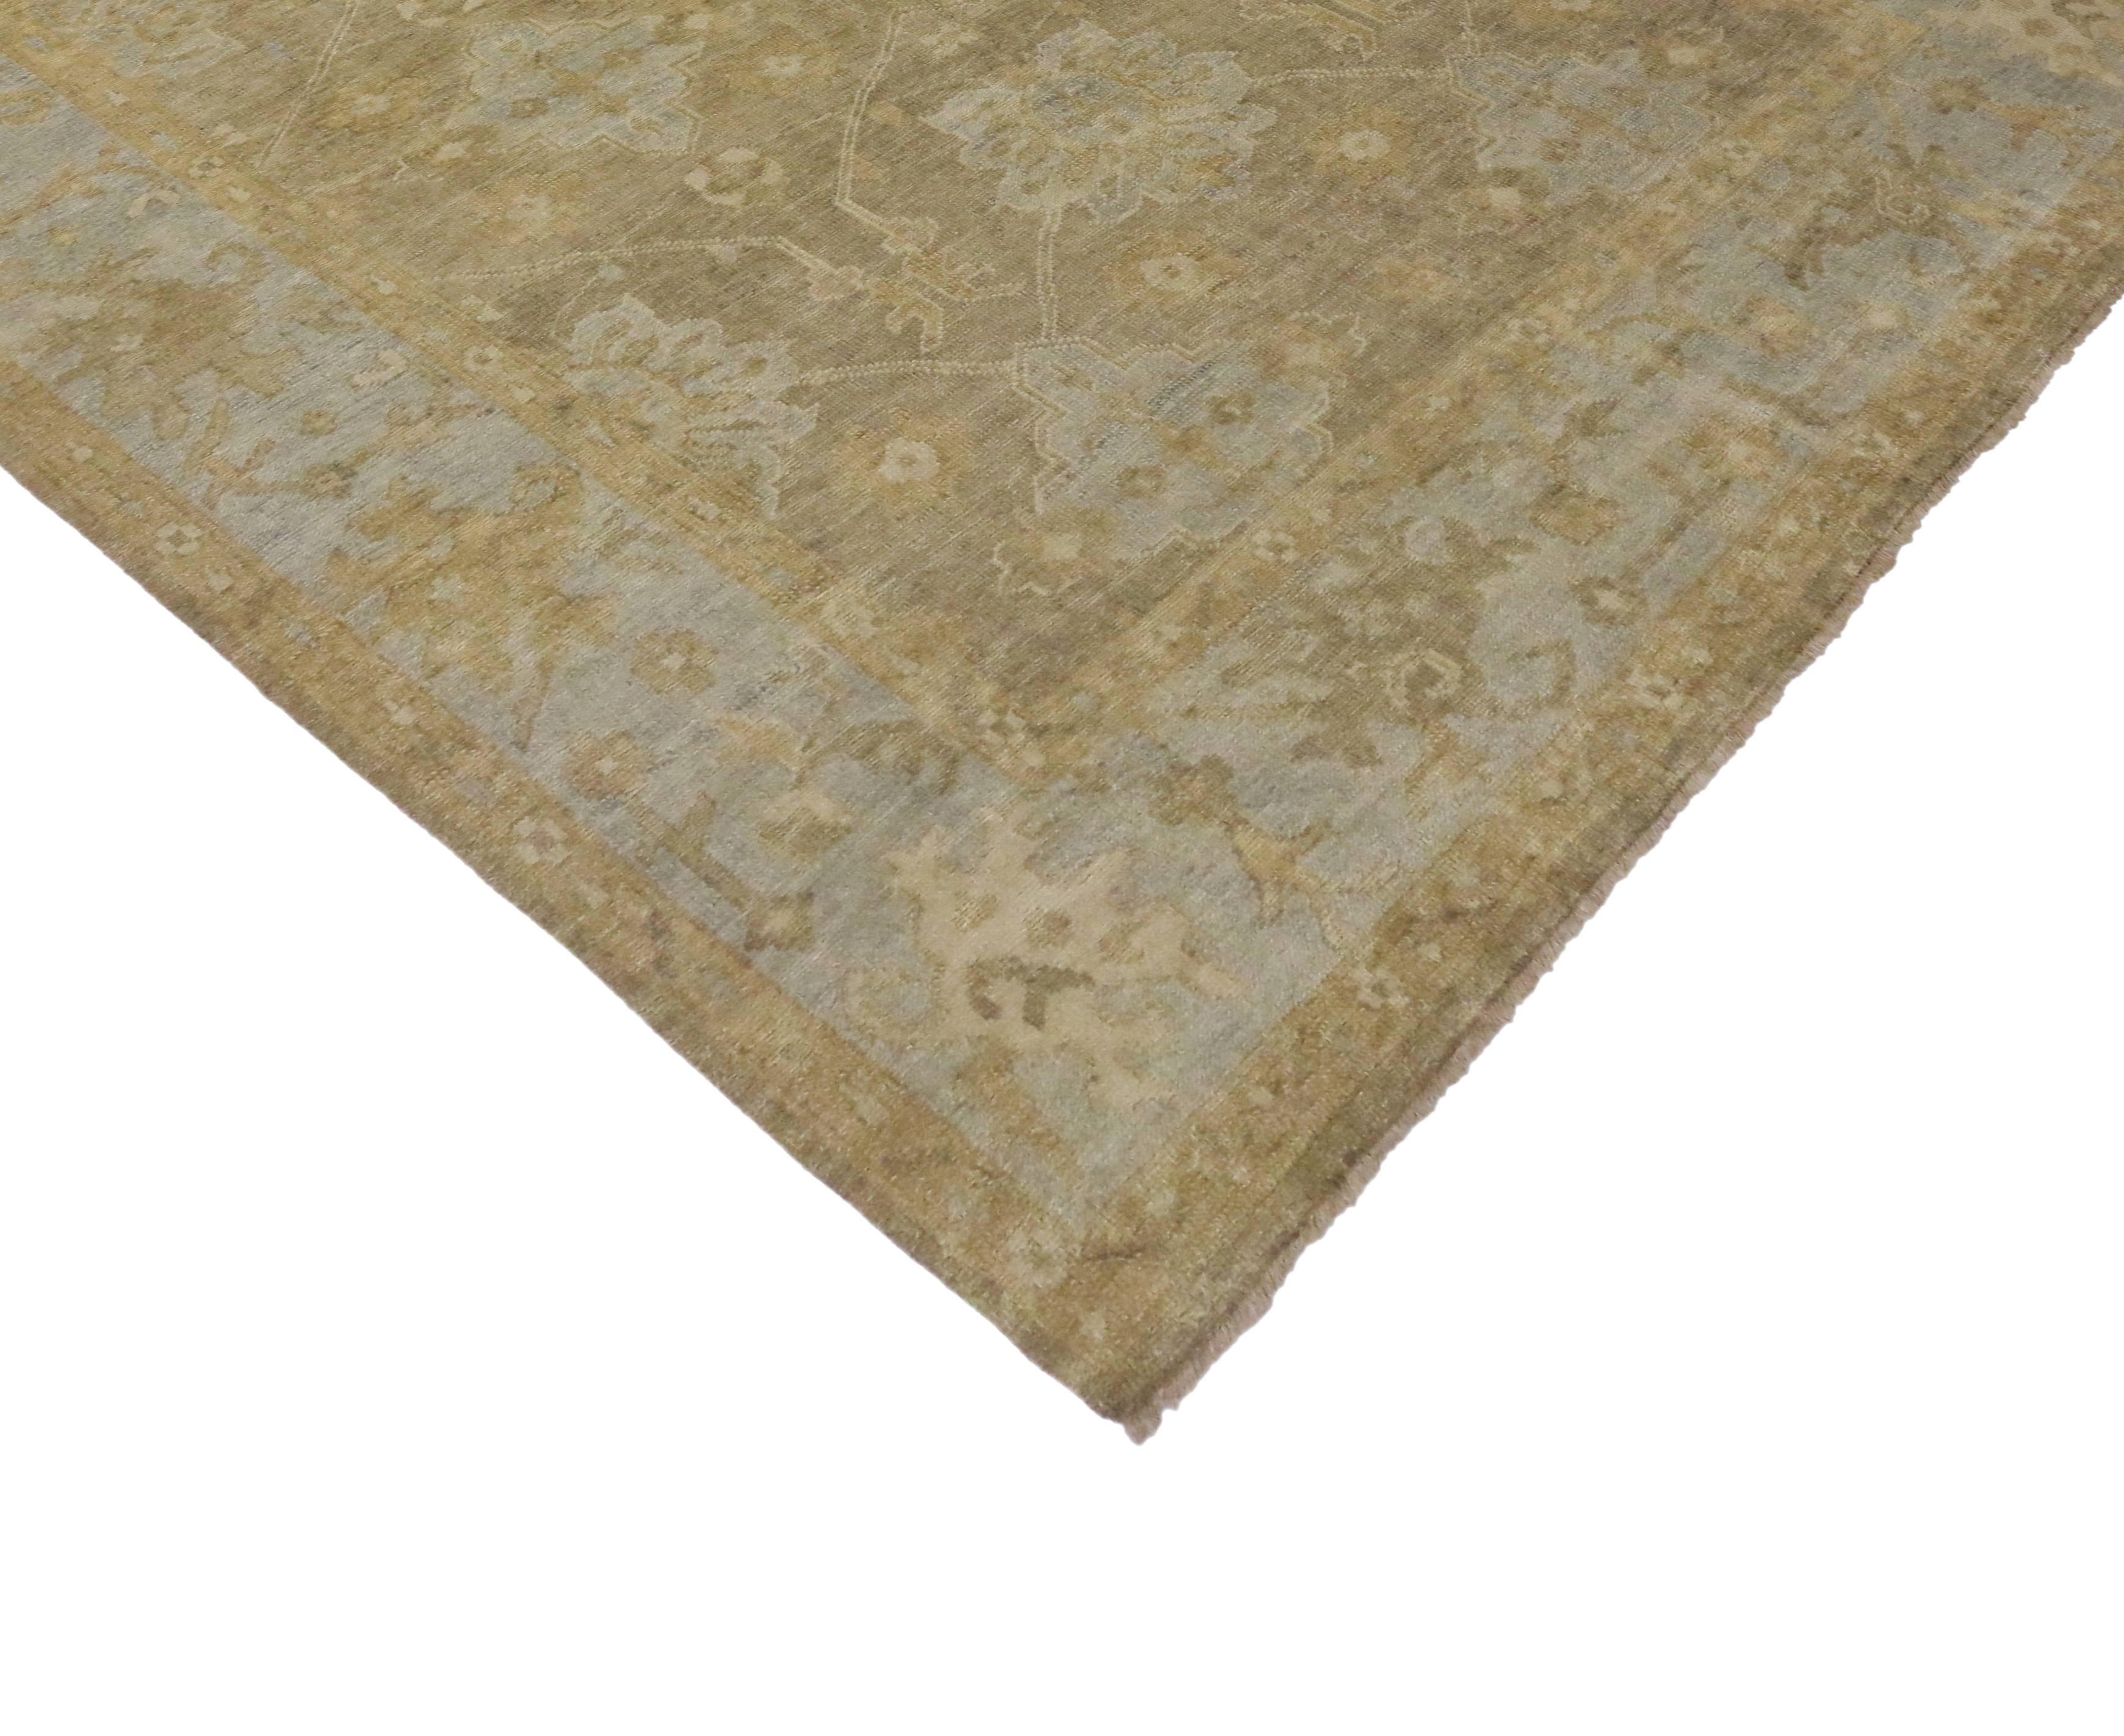 30098 New Contemporary Oushak Rug with Swedish Gustavian Style, Transitional Area Rug. Designed with a Classic aesthetic and lovely warm and neutral colors, this transitional style Oushak rug can ground nearly any space with sophistication and a